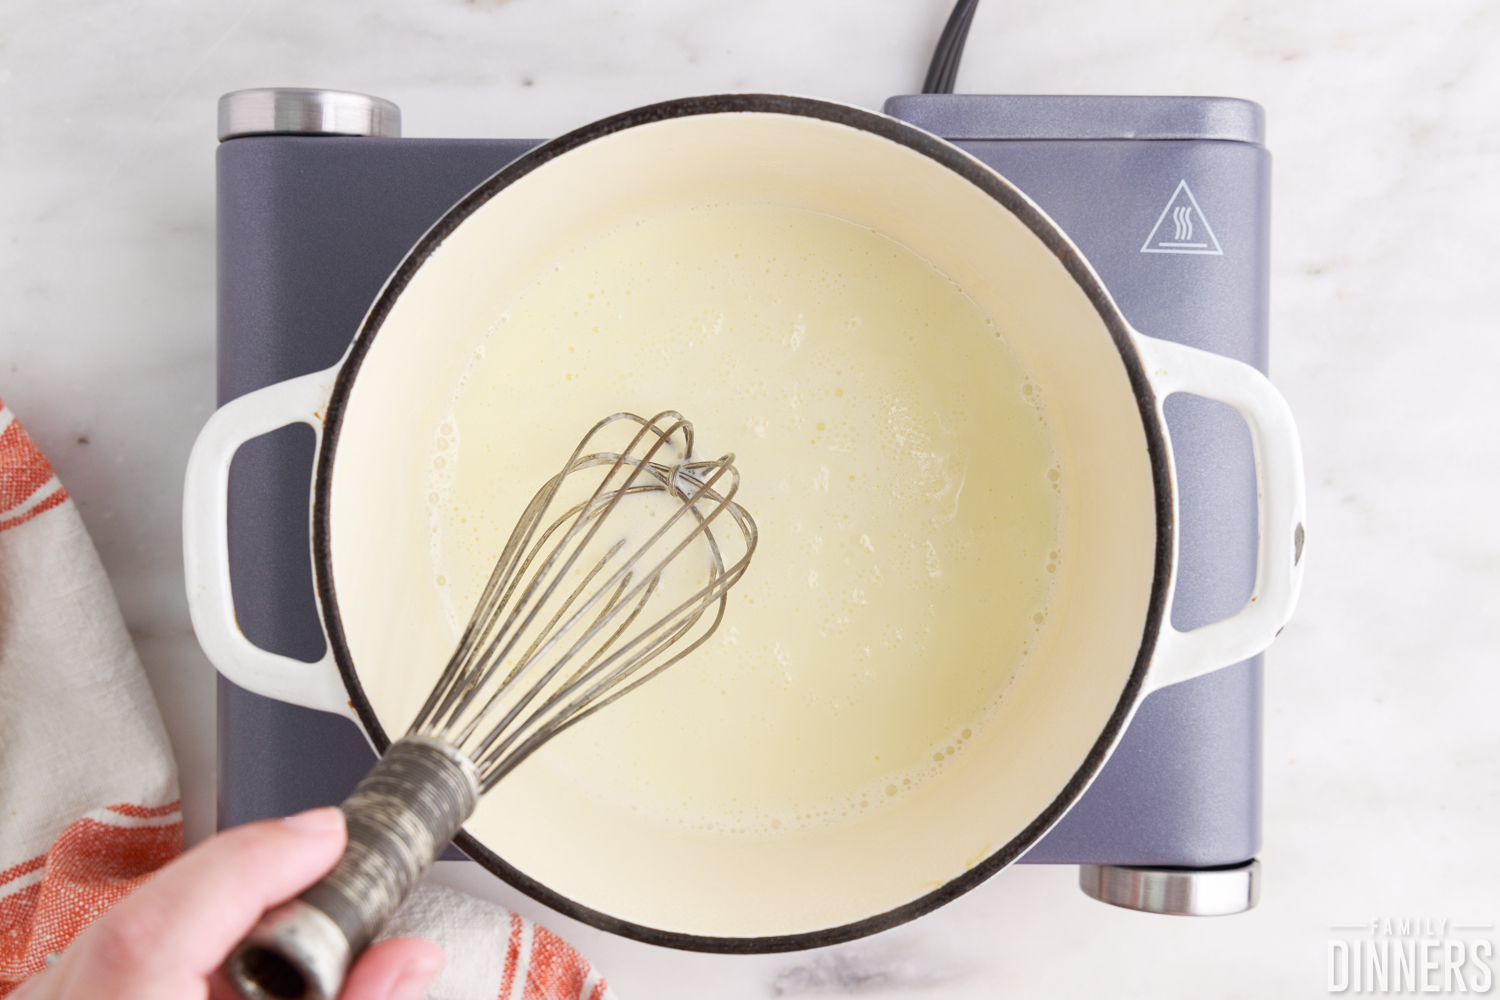 heating heavy cream in a pan